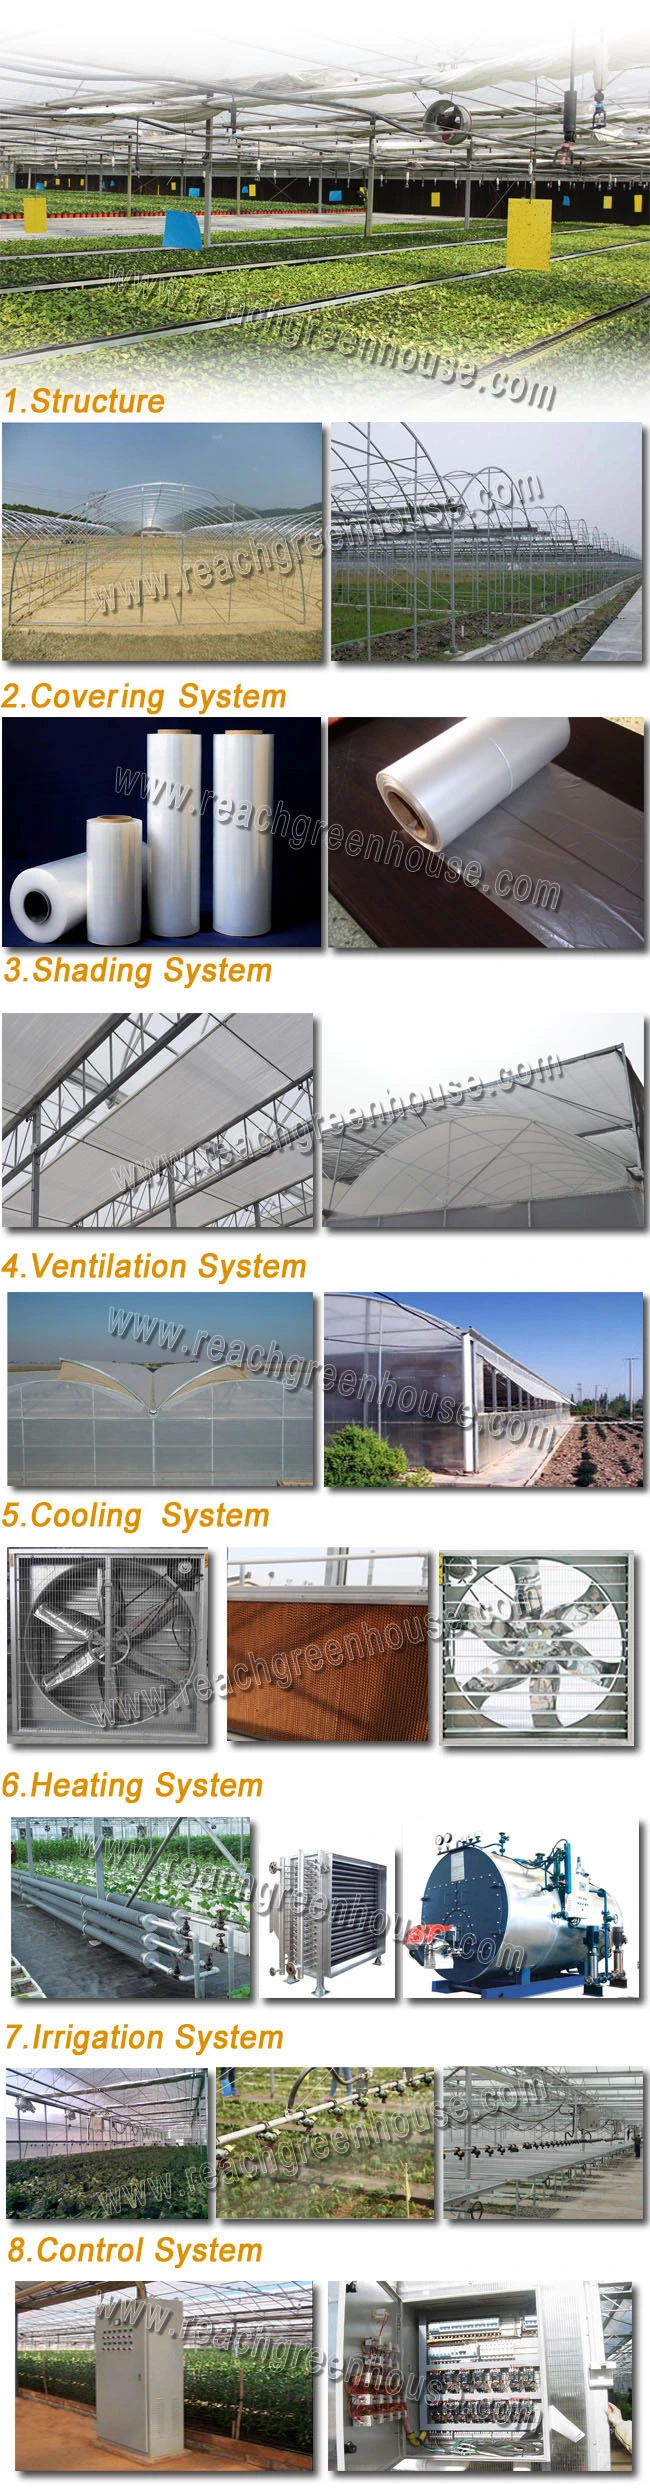 Commercial/Hydroponic Single Span Plastic Film Greenhouse for Vegetable Planting